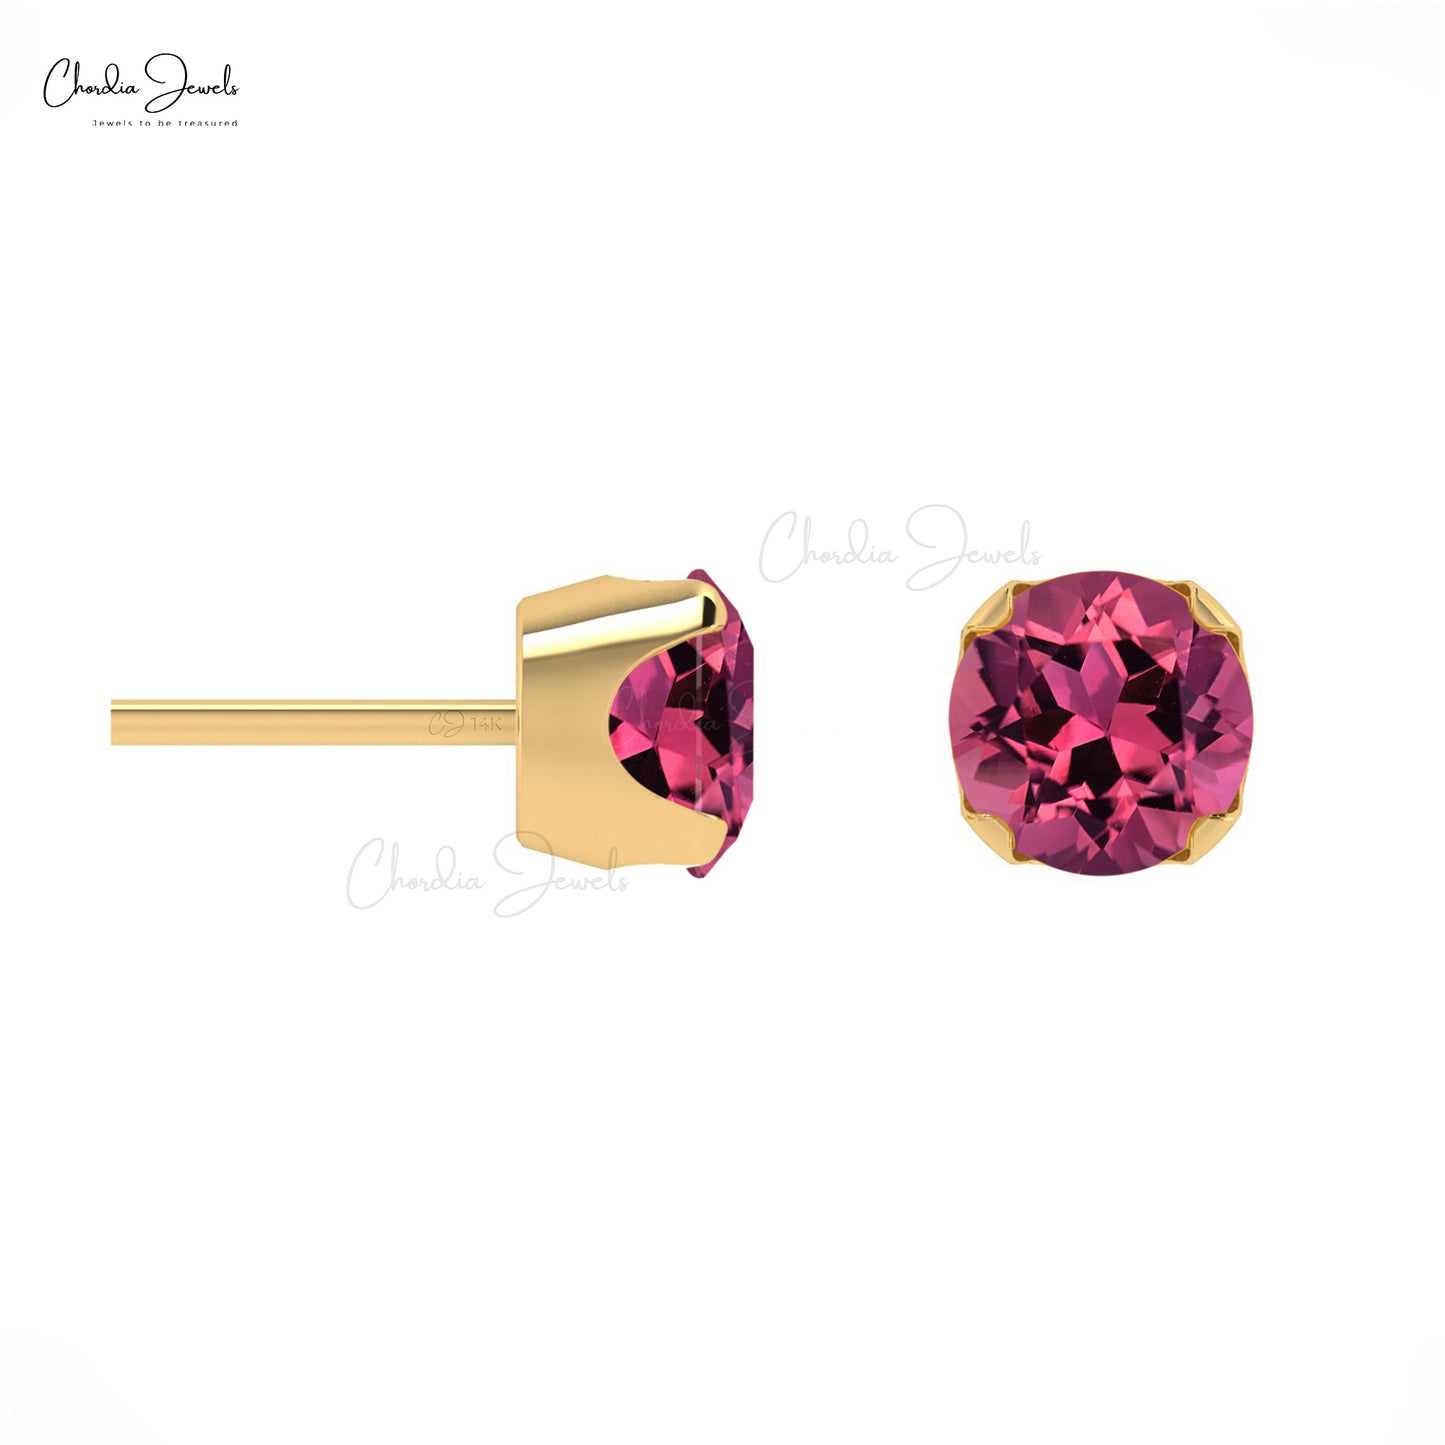 Genuine Pink Tourmaline 4mm Round Cut Gemstone Studs Earring 14k Solid Gold Studs For Her